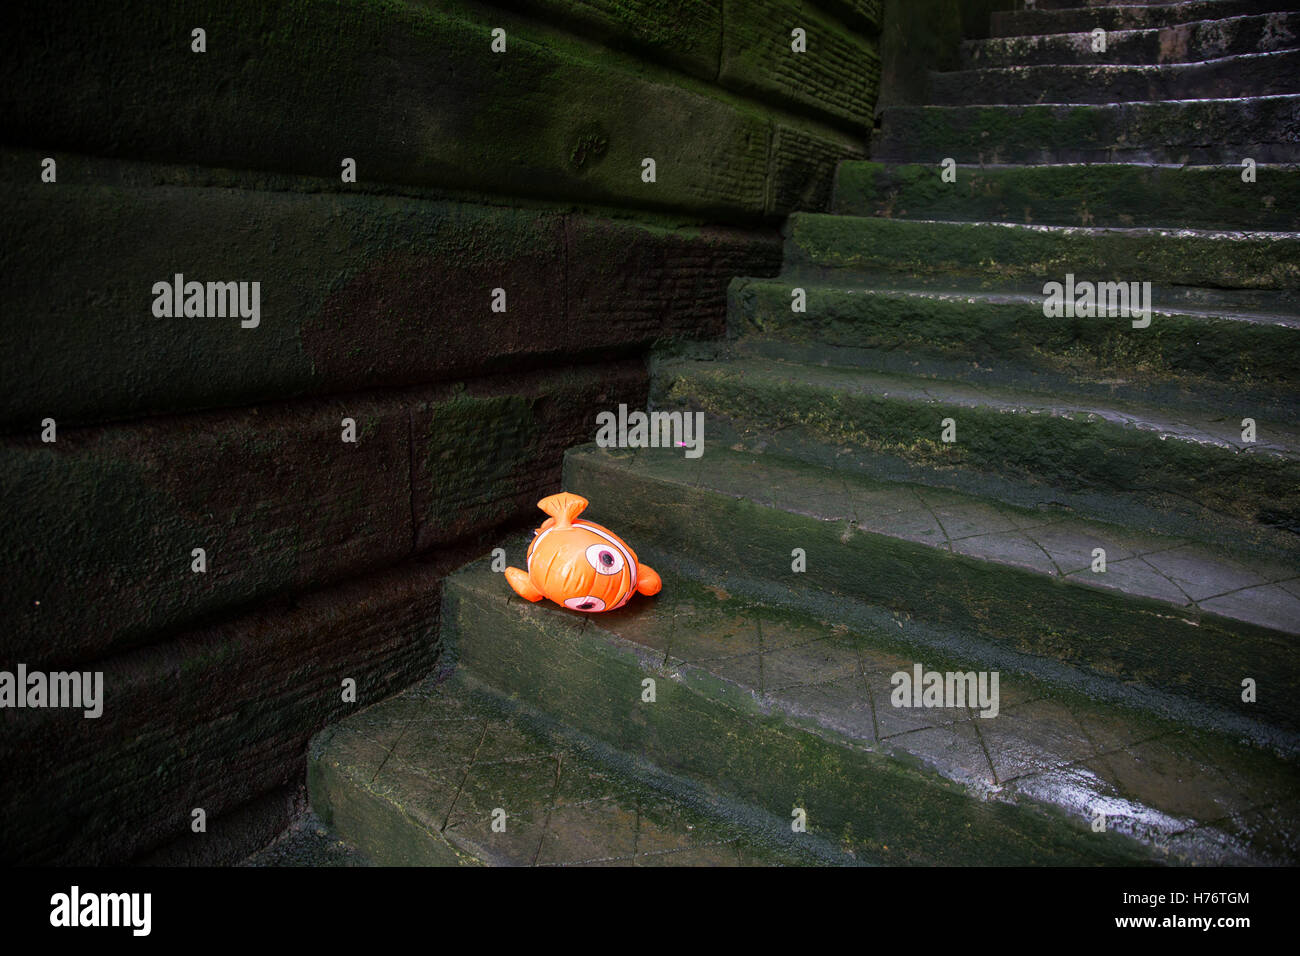 Inflatable Finding Nemo character washed up on some old steps leading down to the River Thames in London, England, United Kingdom. Finding Nemo is a 2003 American computer-animated comedy-drama adventure film produced by Pixar Animation Studios and released by Walt Disney Pictures. Stock Photo